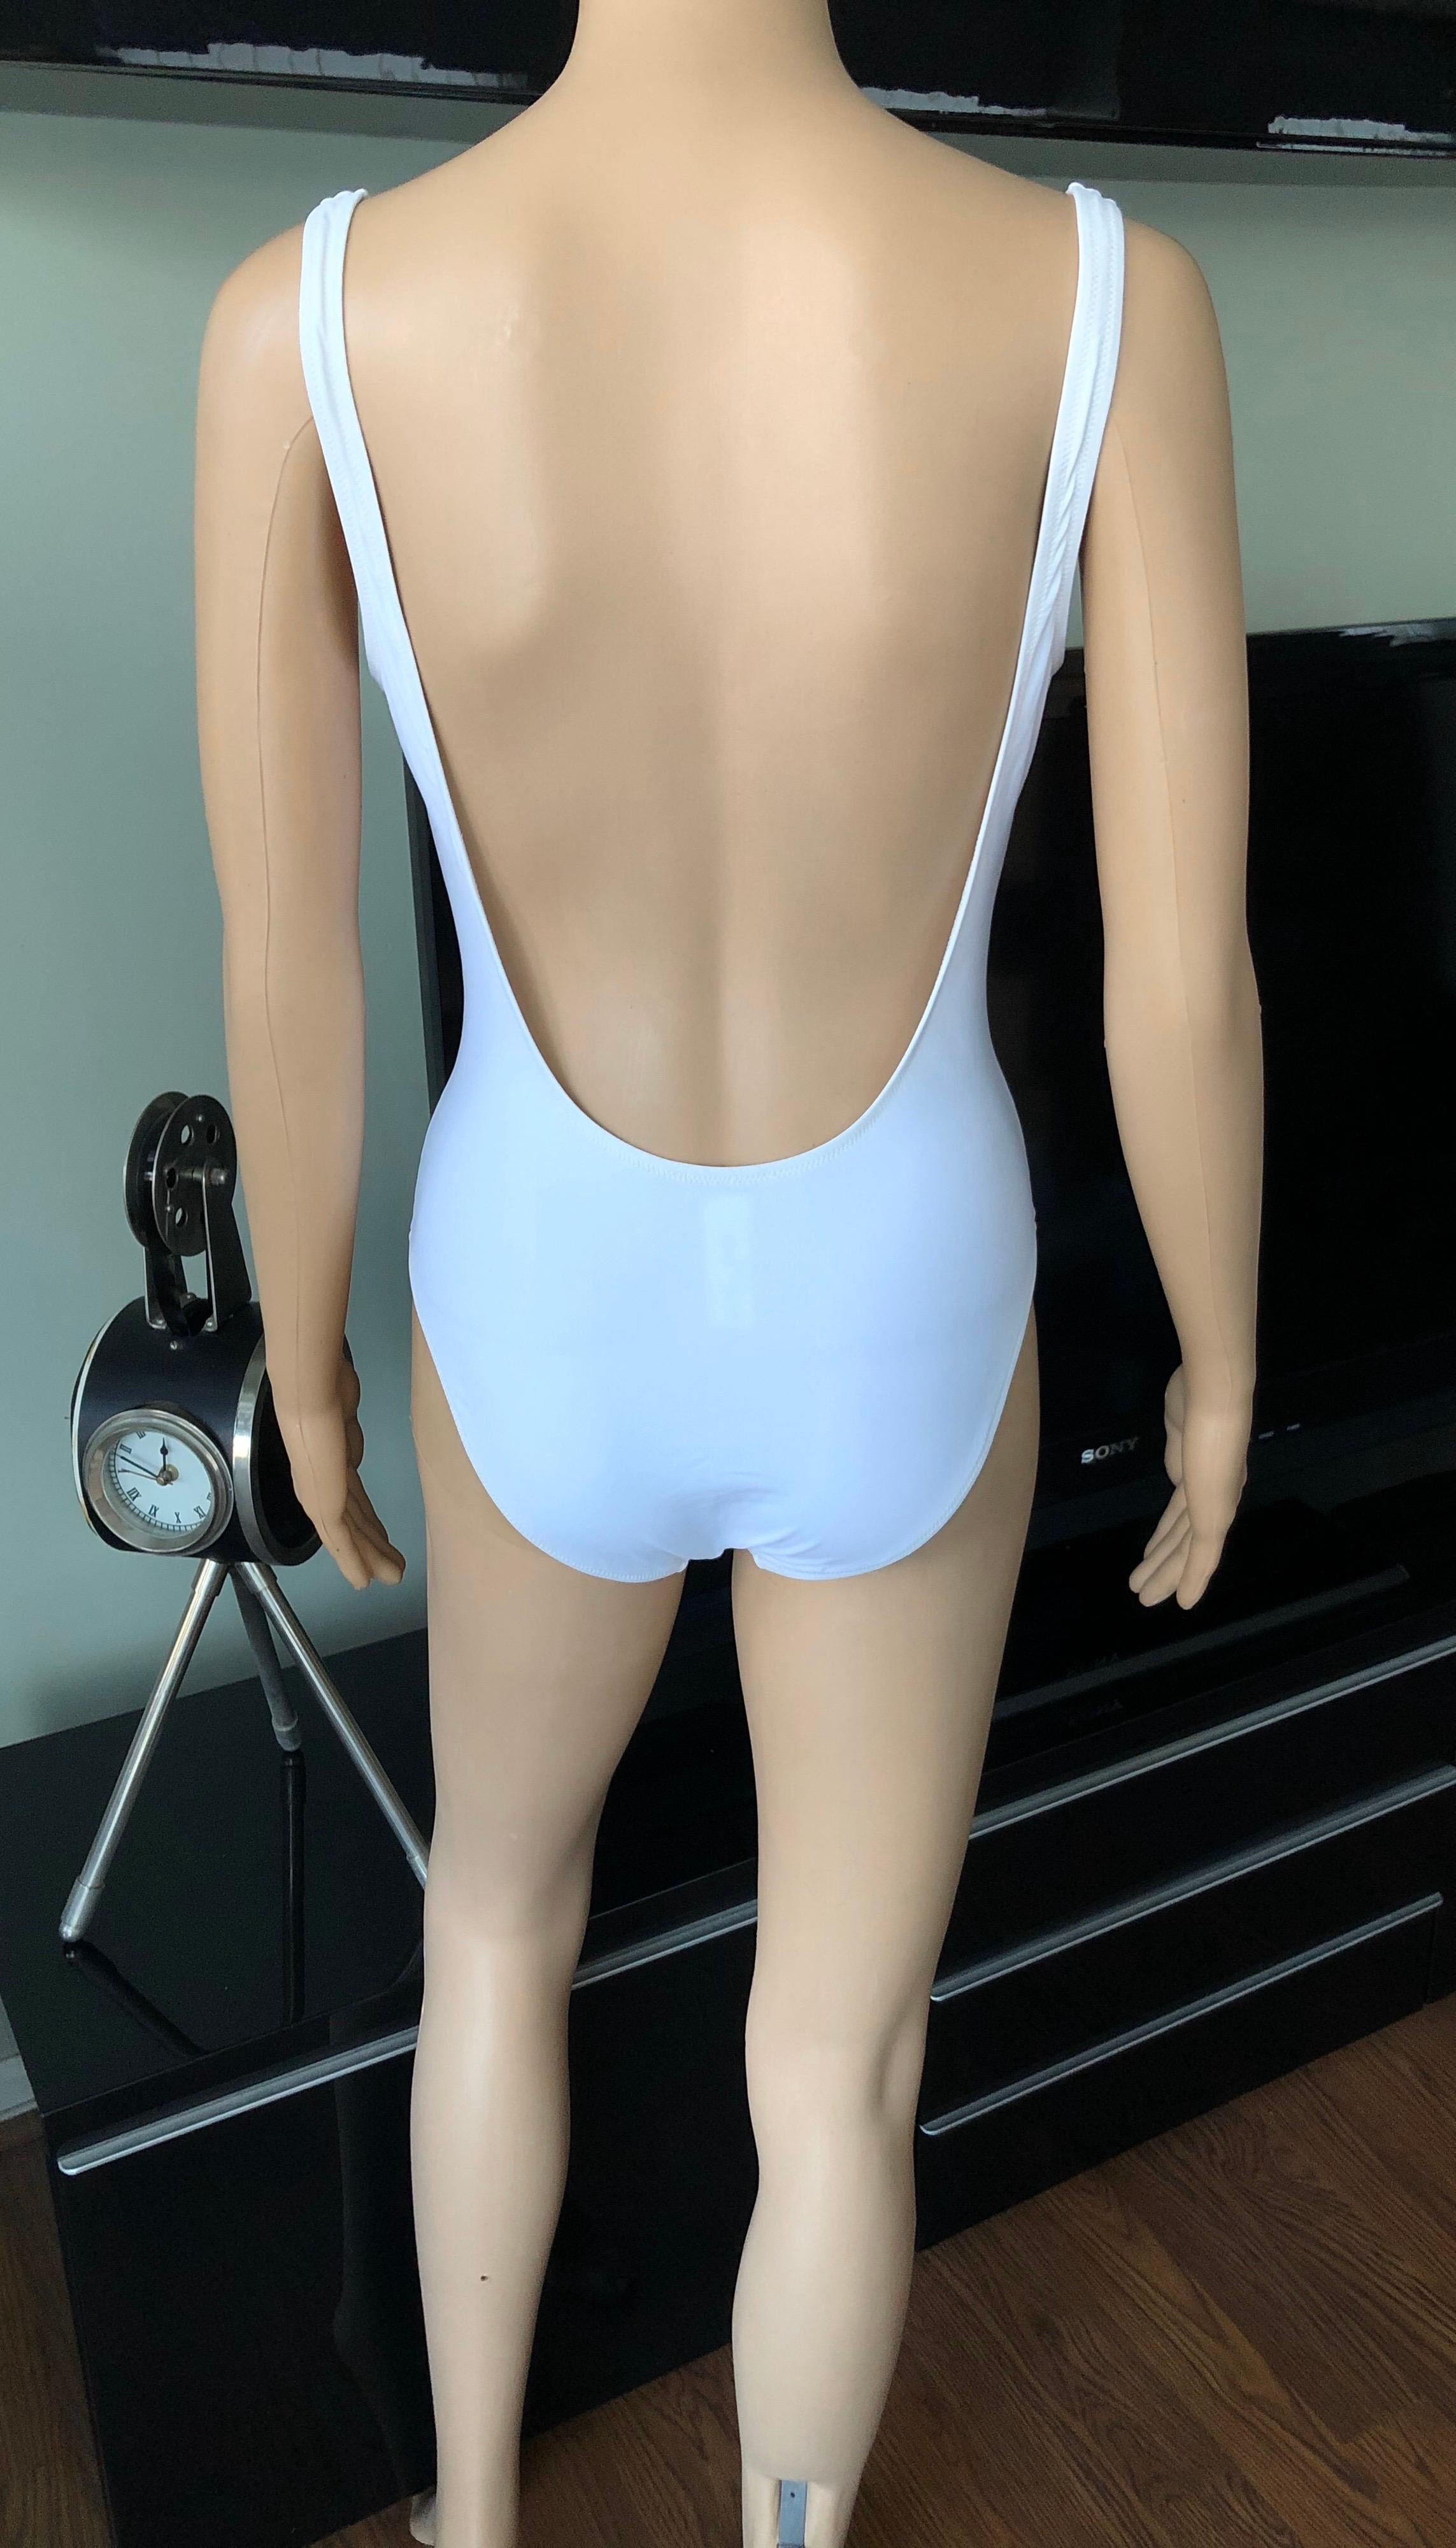 Blue Dolce & Gabbana c. 2003 Plunging Lace Up Corset Backless White Swimsuit Bodysuit